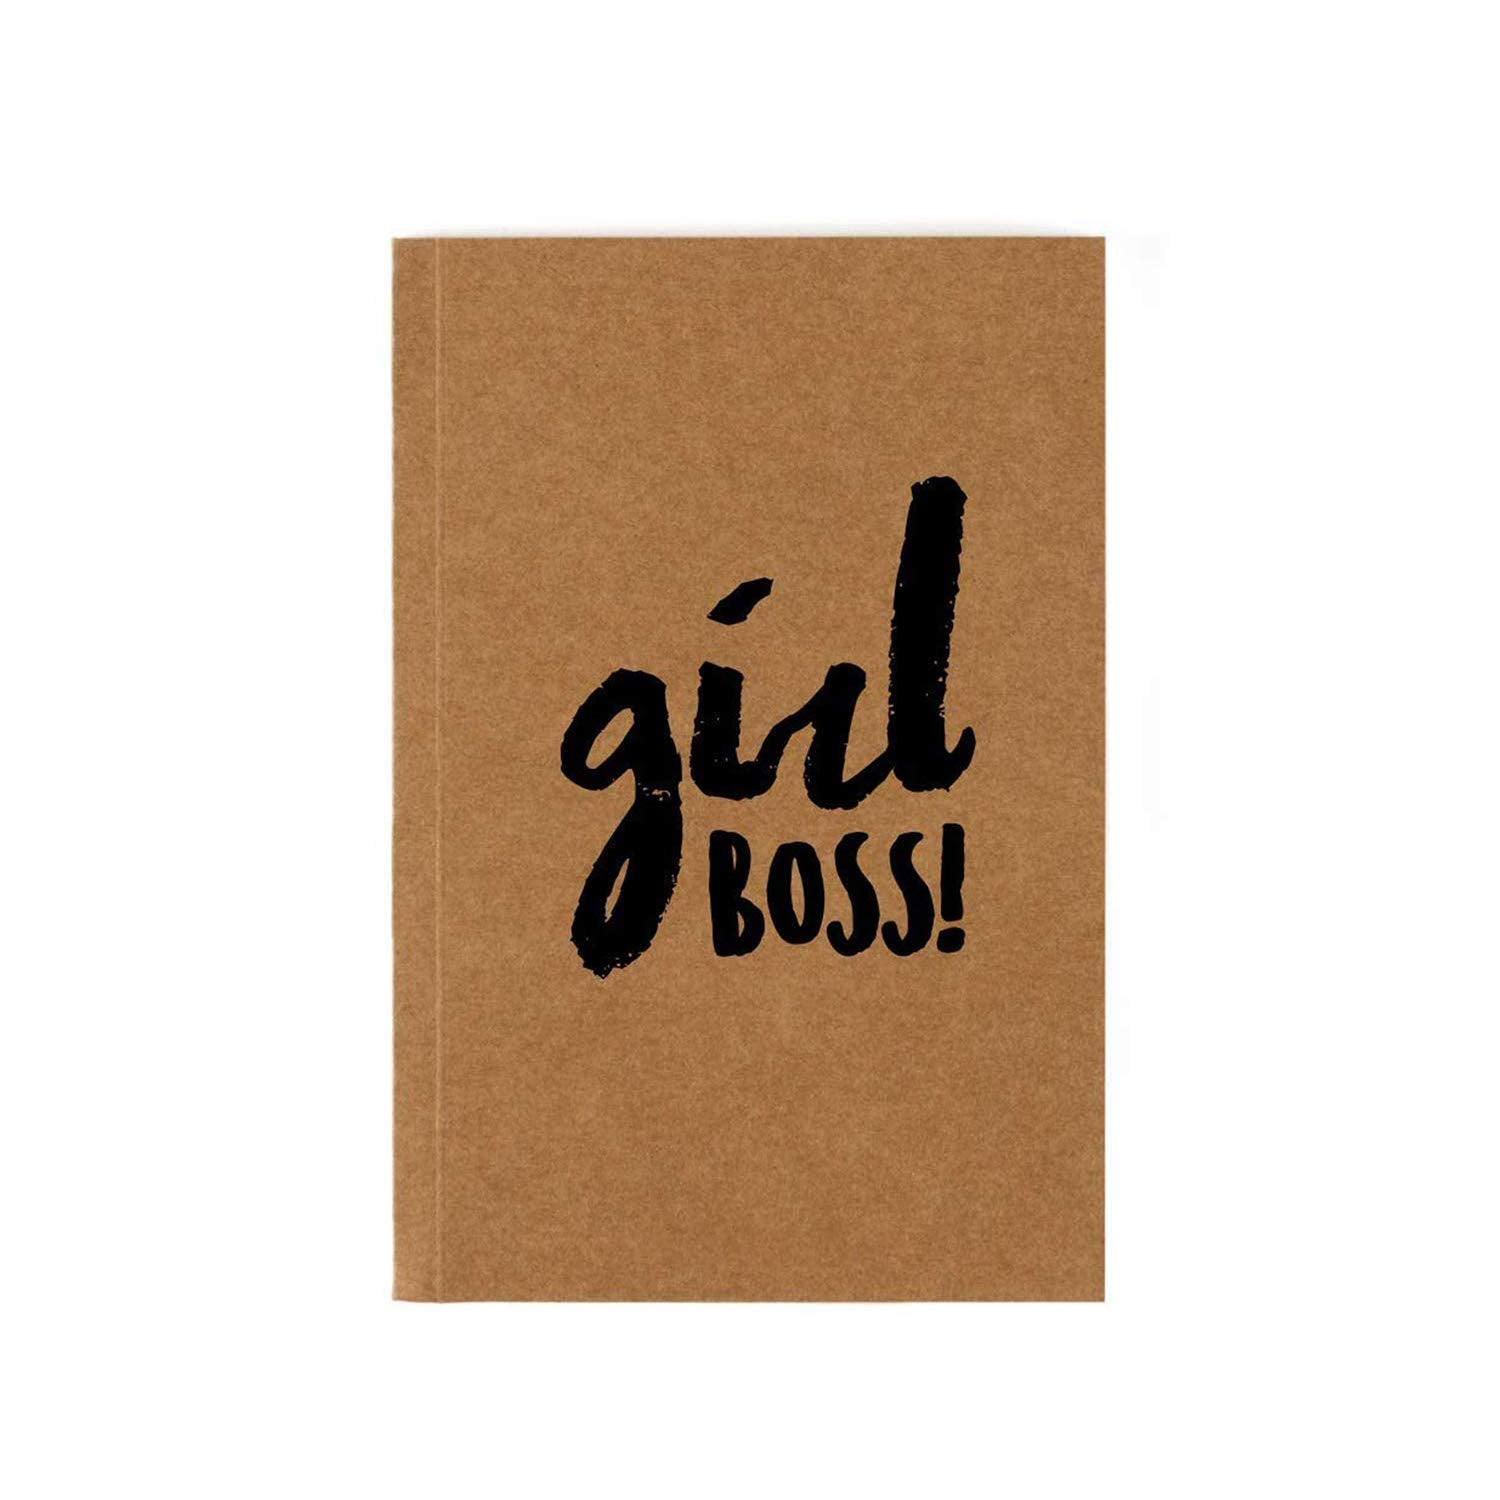 Kids Mandi pocket size notebook journal, perfect for corporate gifts.